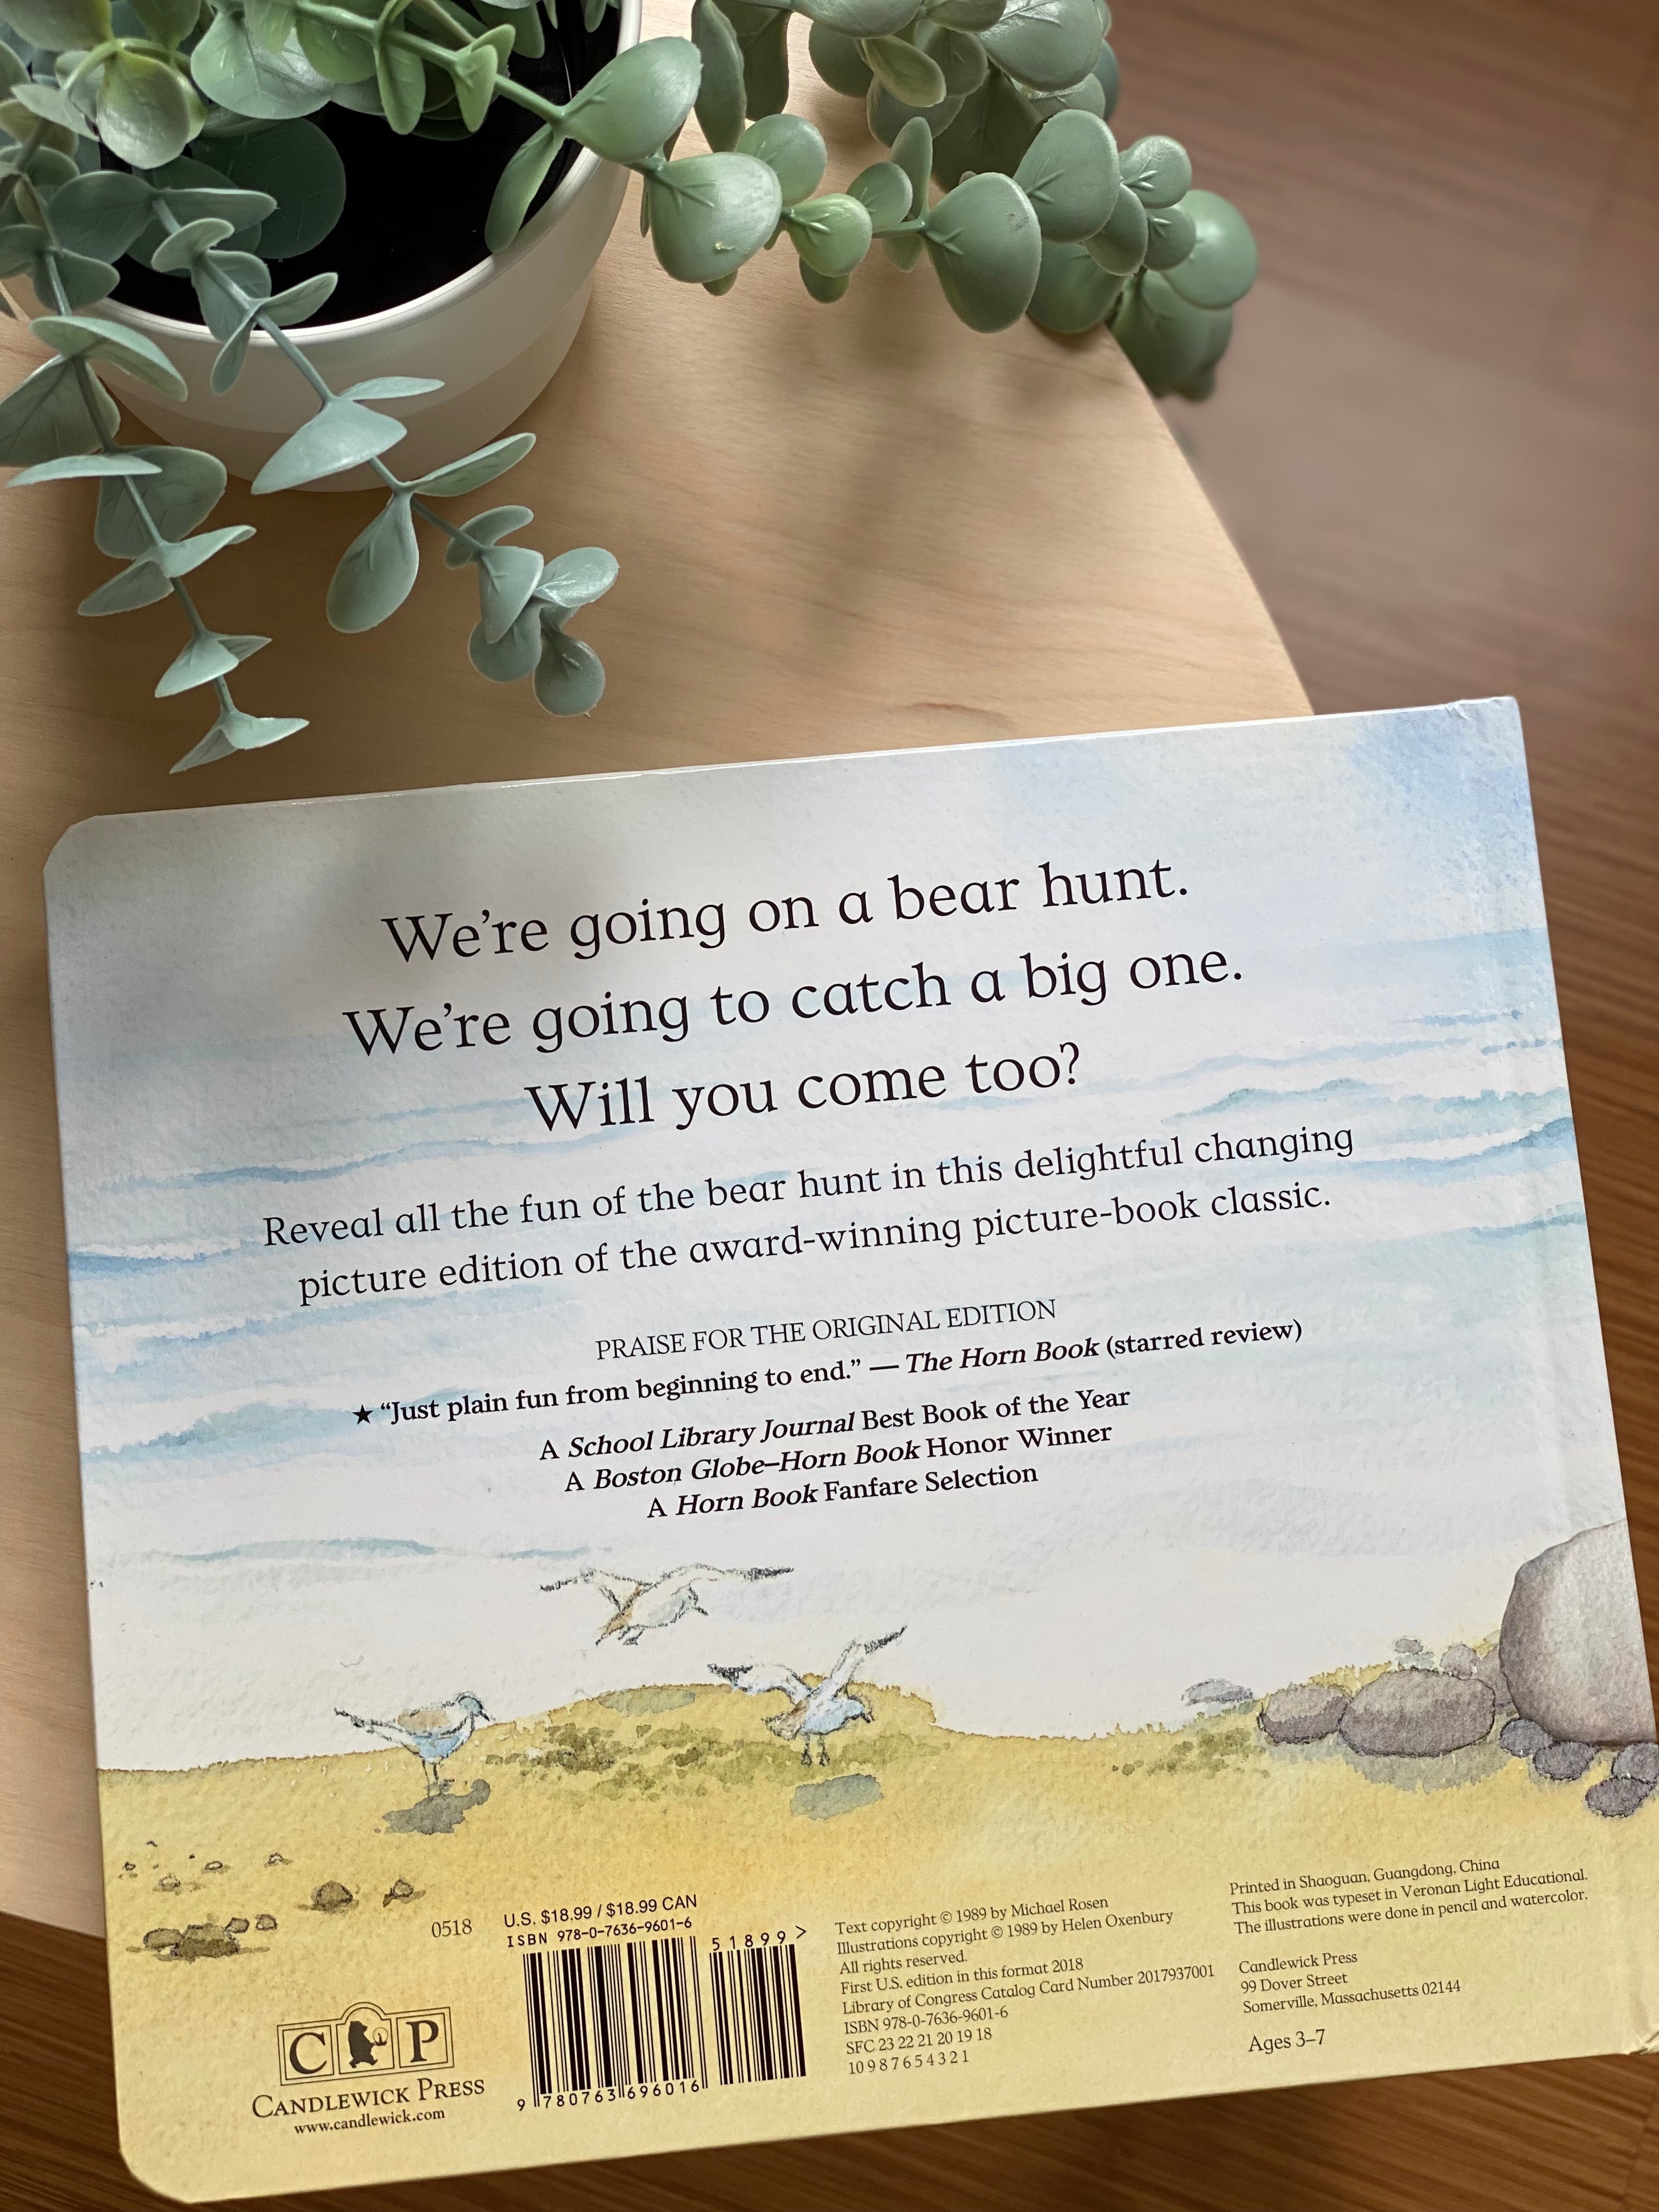 We're Going on a Bear Hunt Changing Picture Book